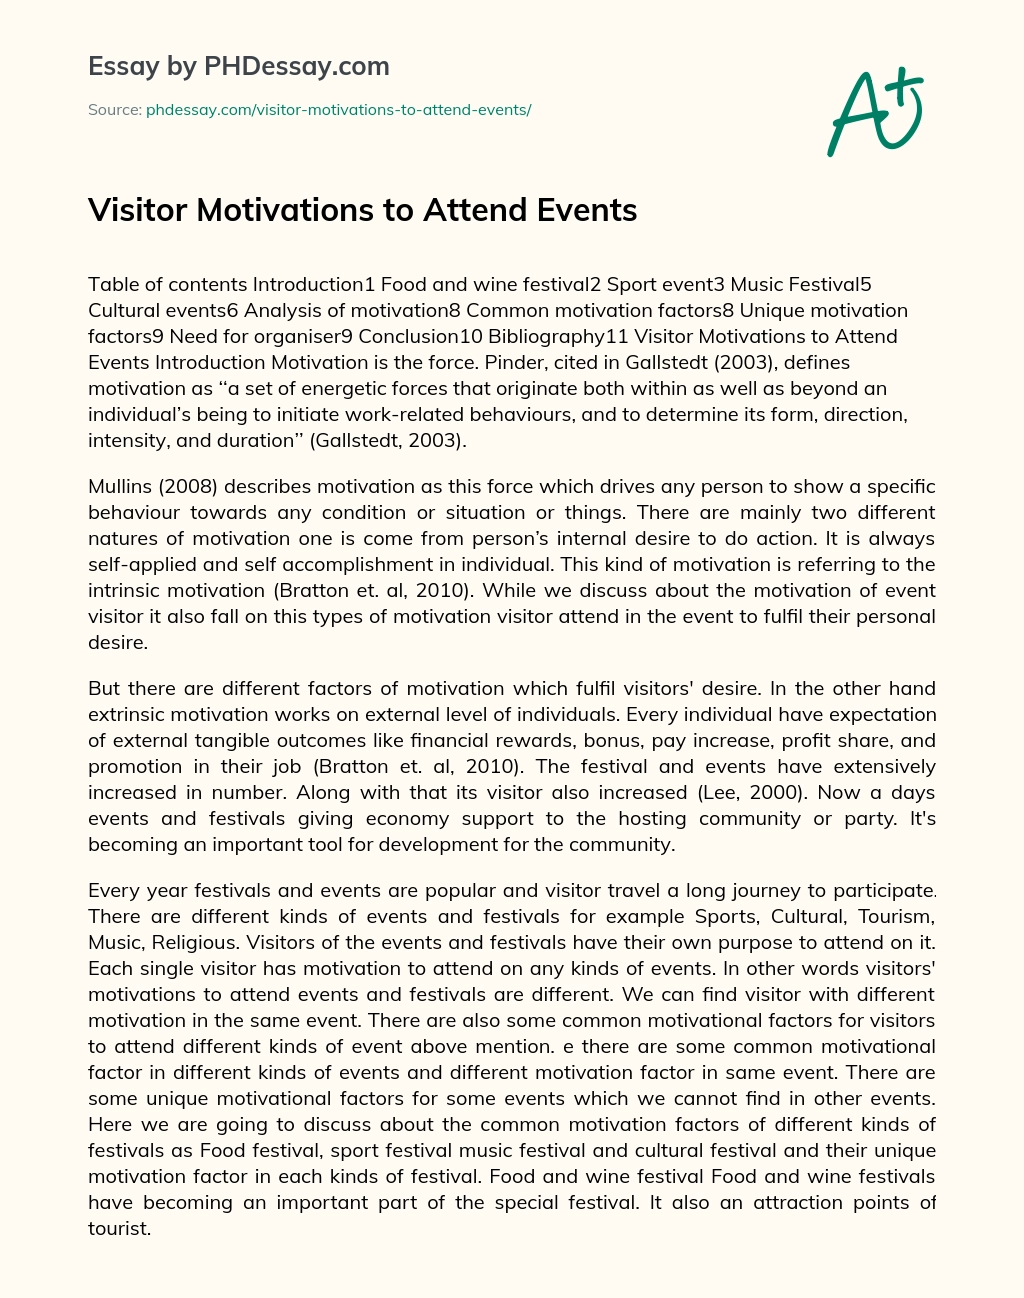 Visitor Motivations to Attend Events essay